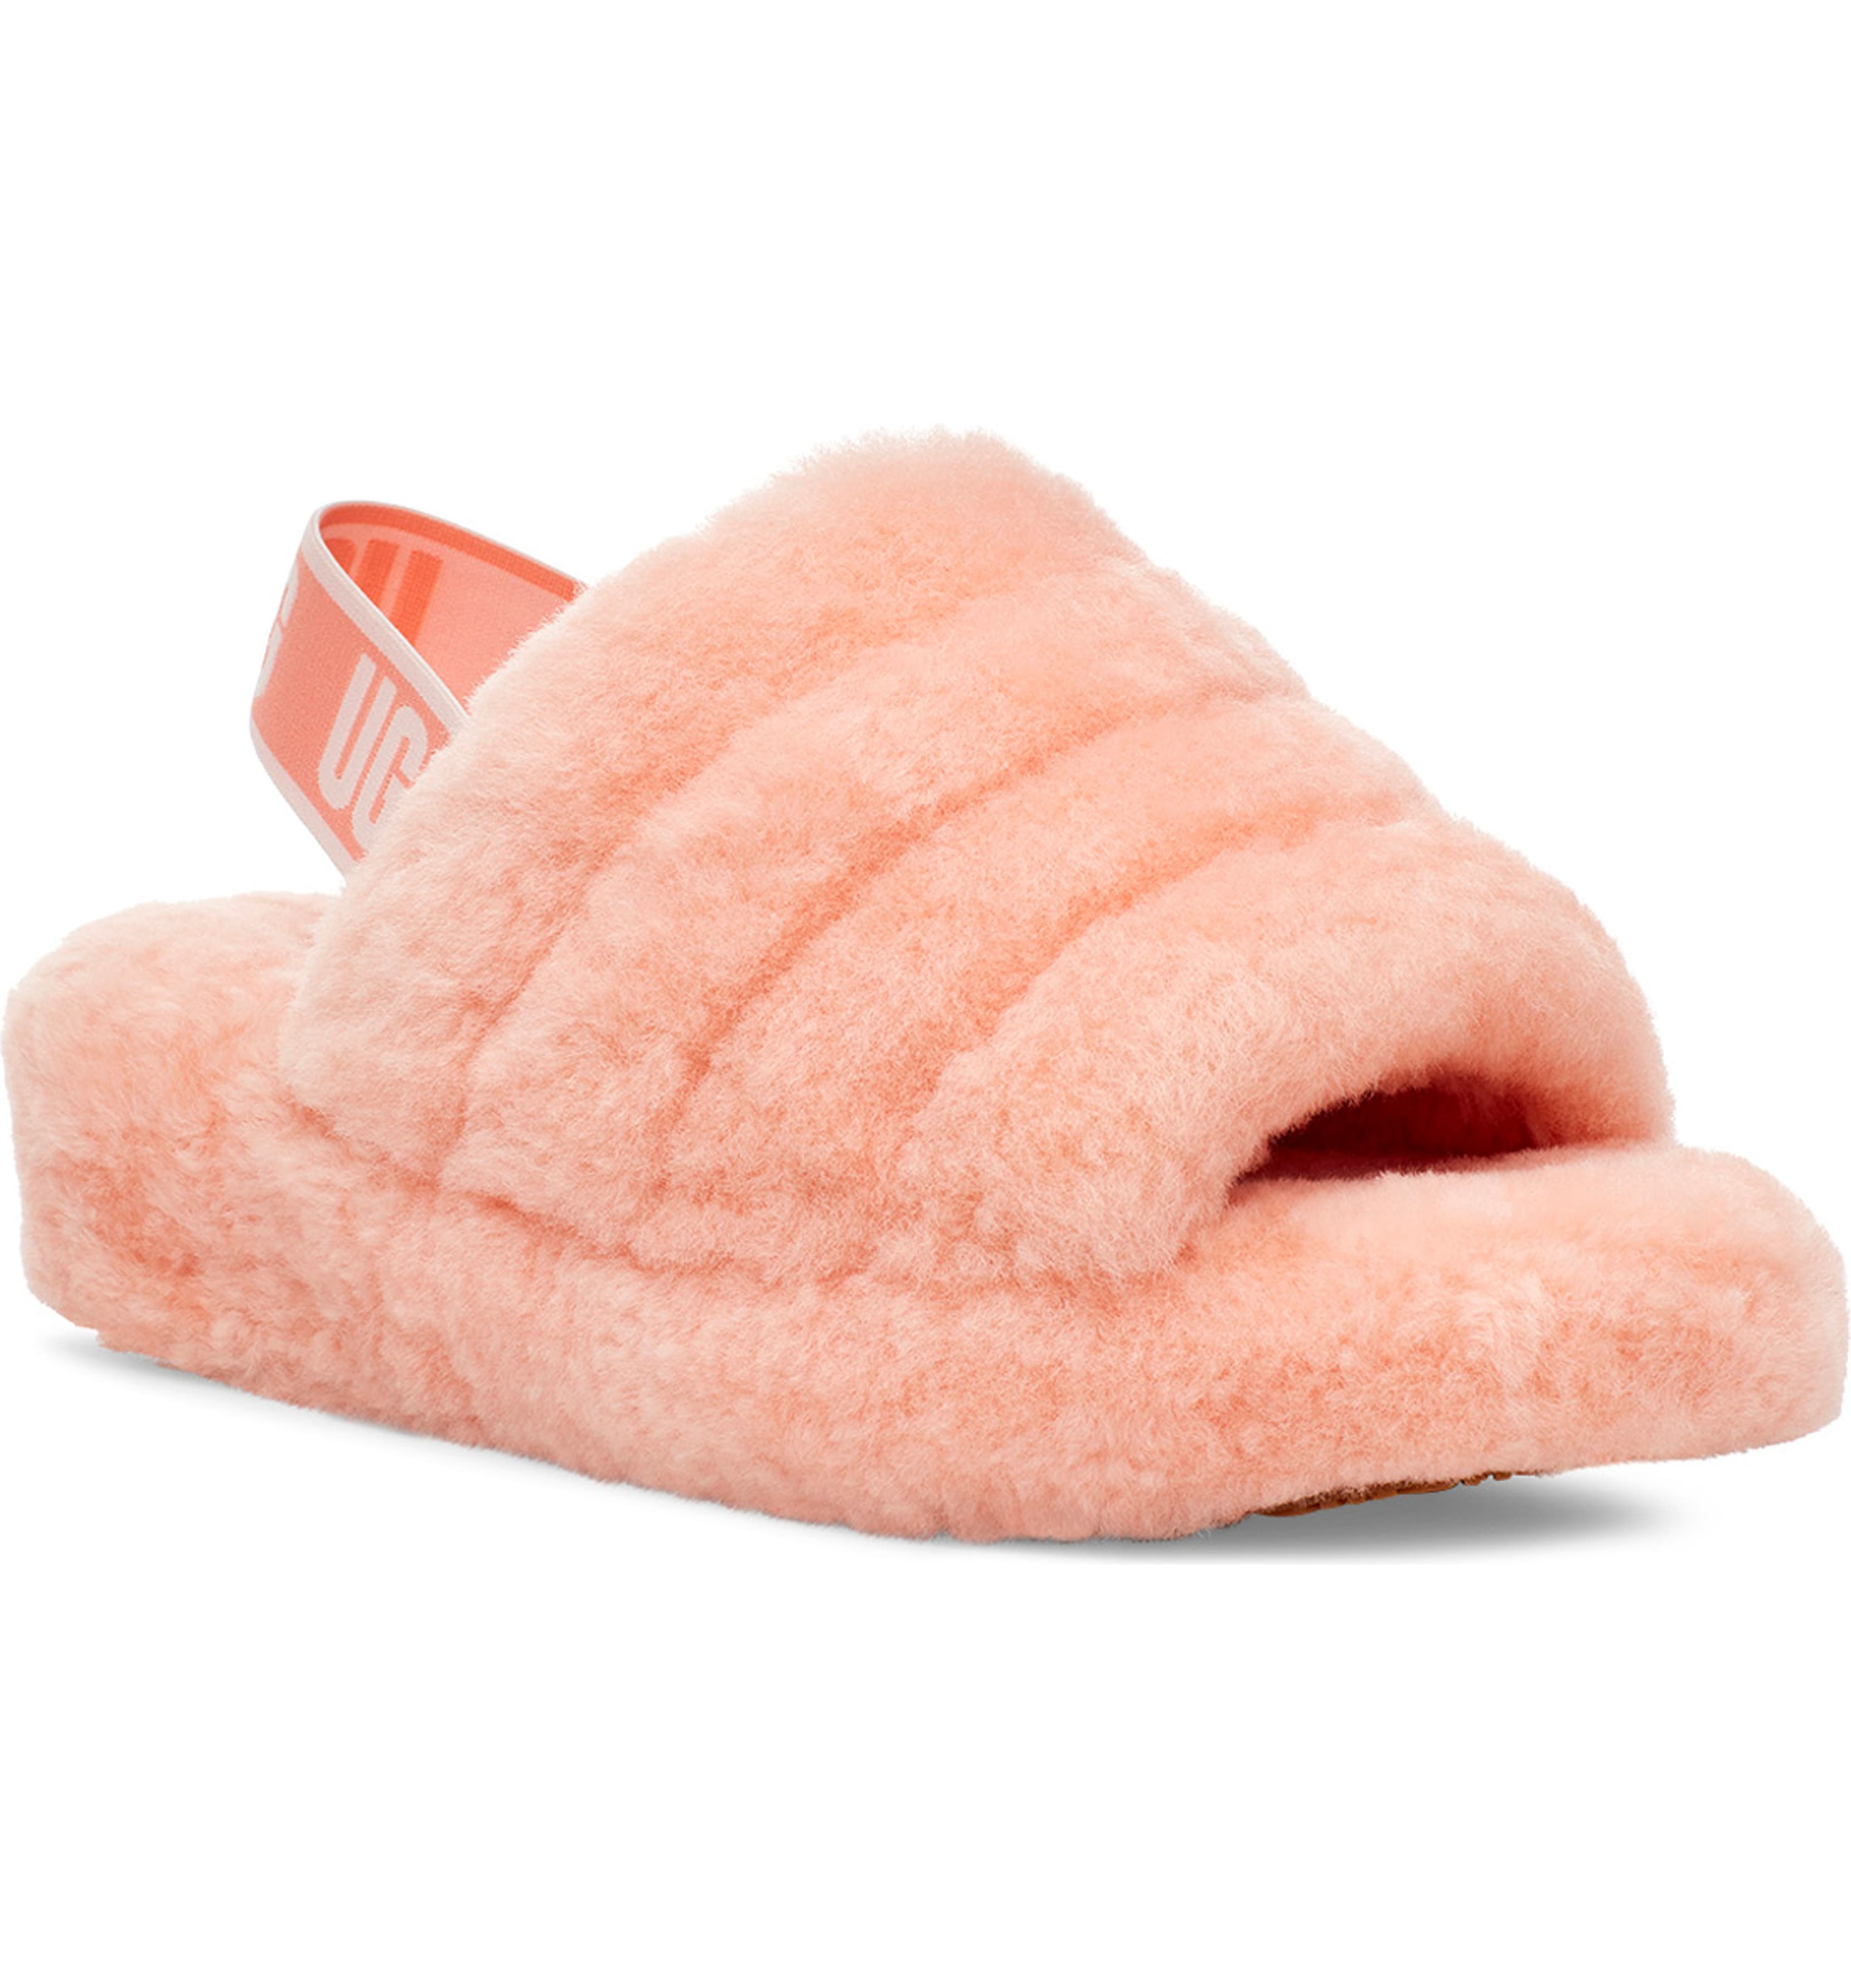 ugg cozy 11 slippers